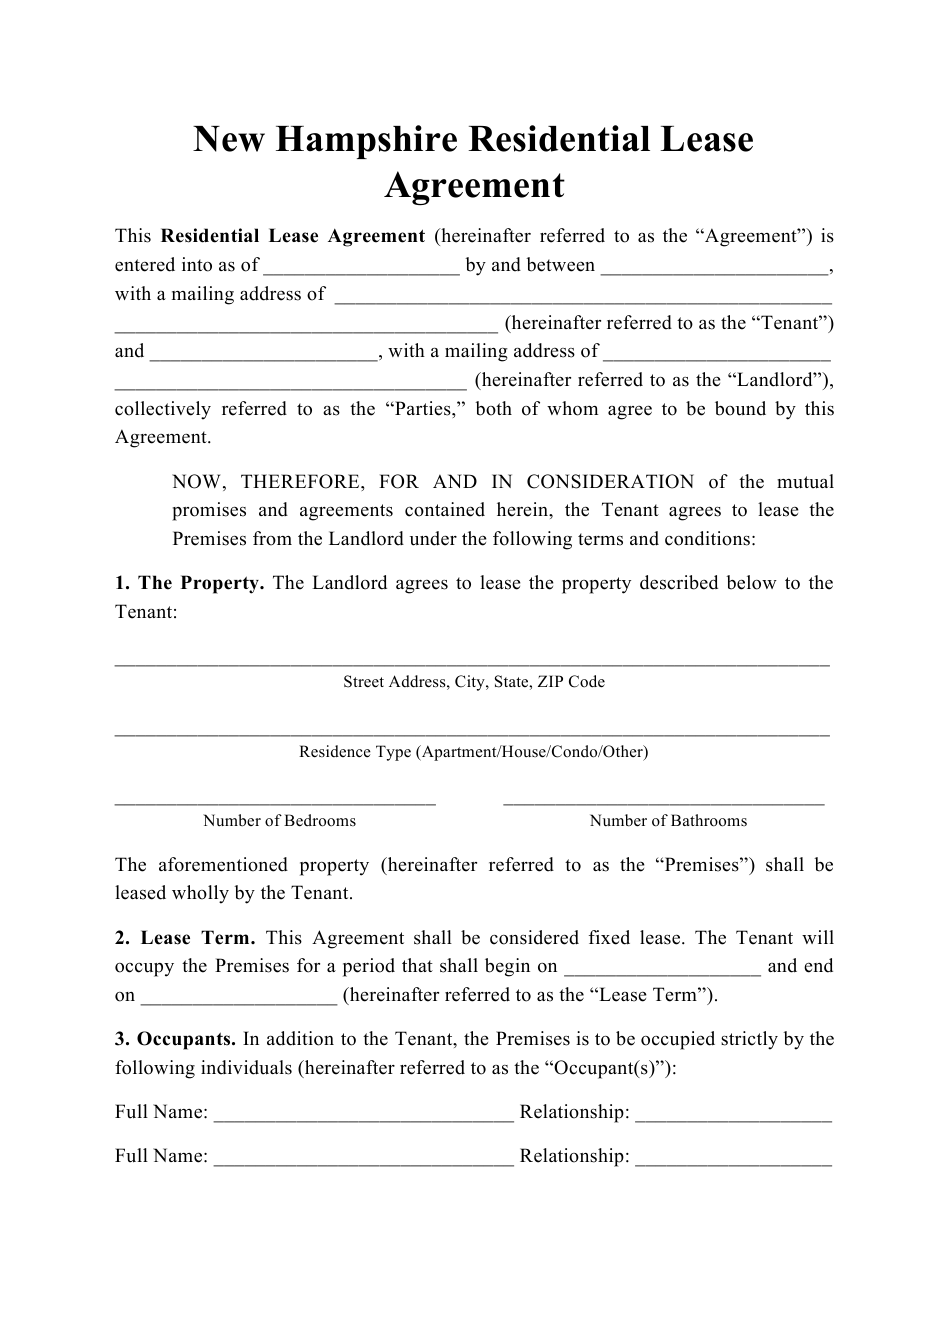 New Hampshire Residential Lease Agreement Template Download Printable 